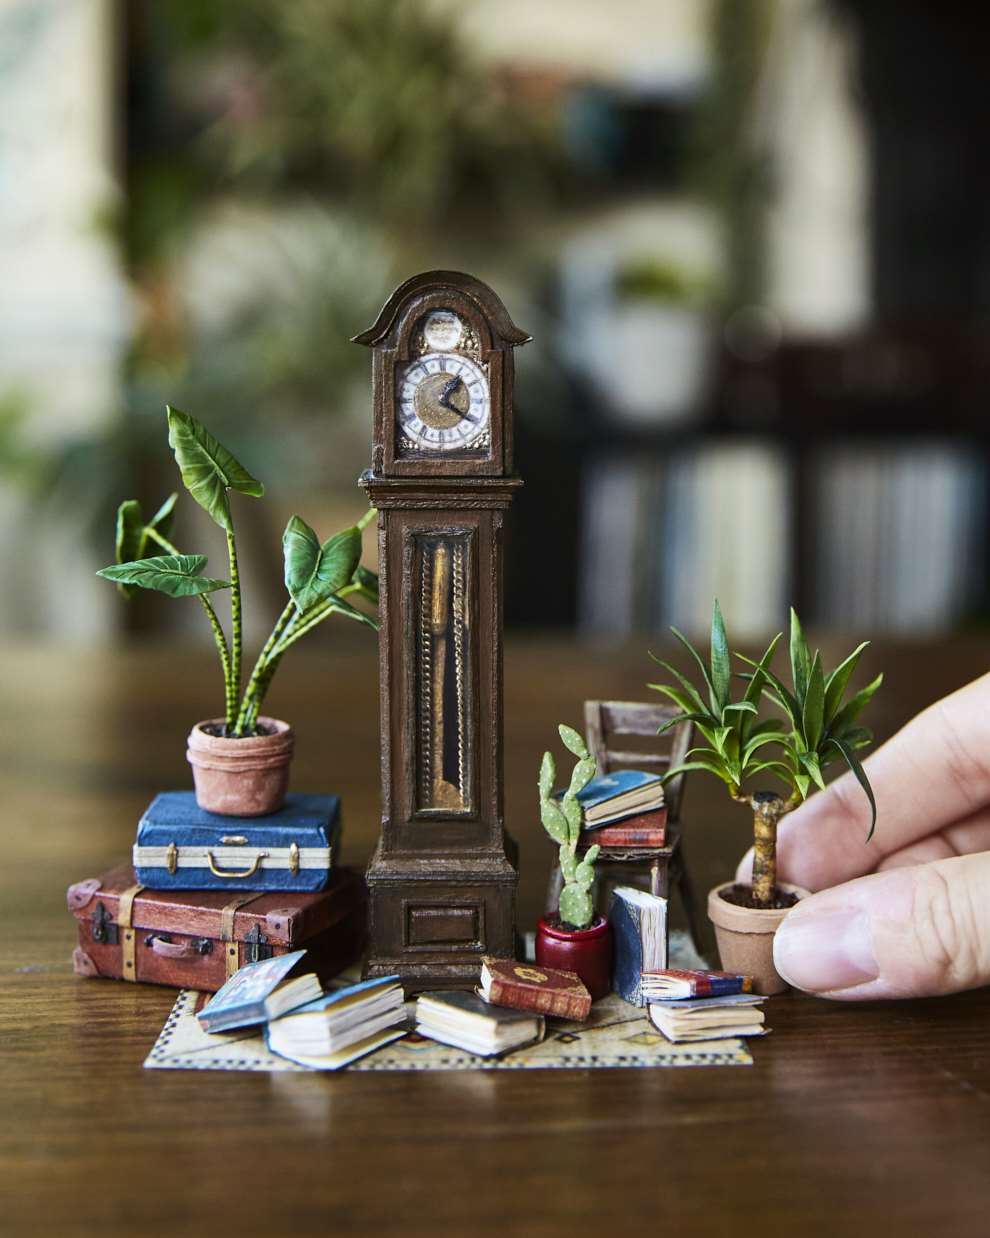 Hannah Lemon, Miniature sculpture of a tiny clock made from air drying clay, wood, paper and paint.